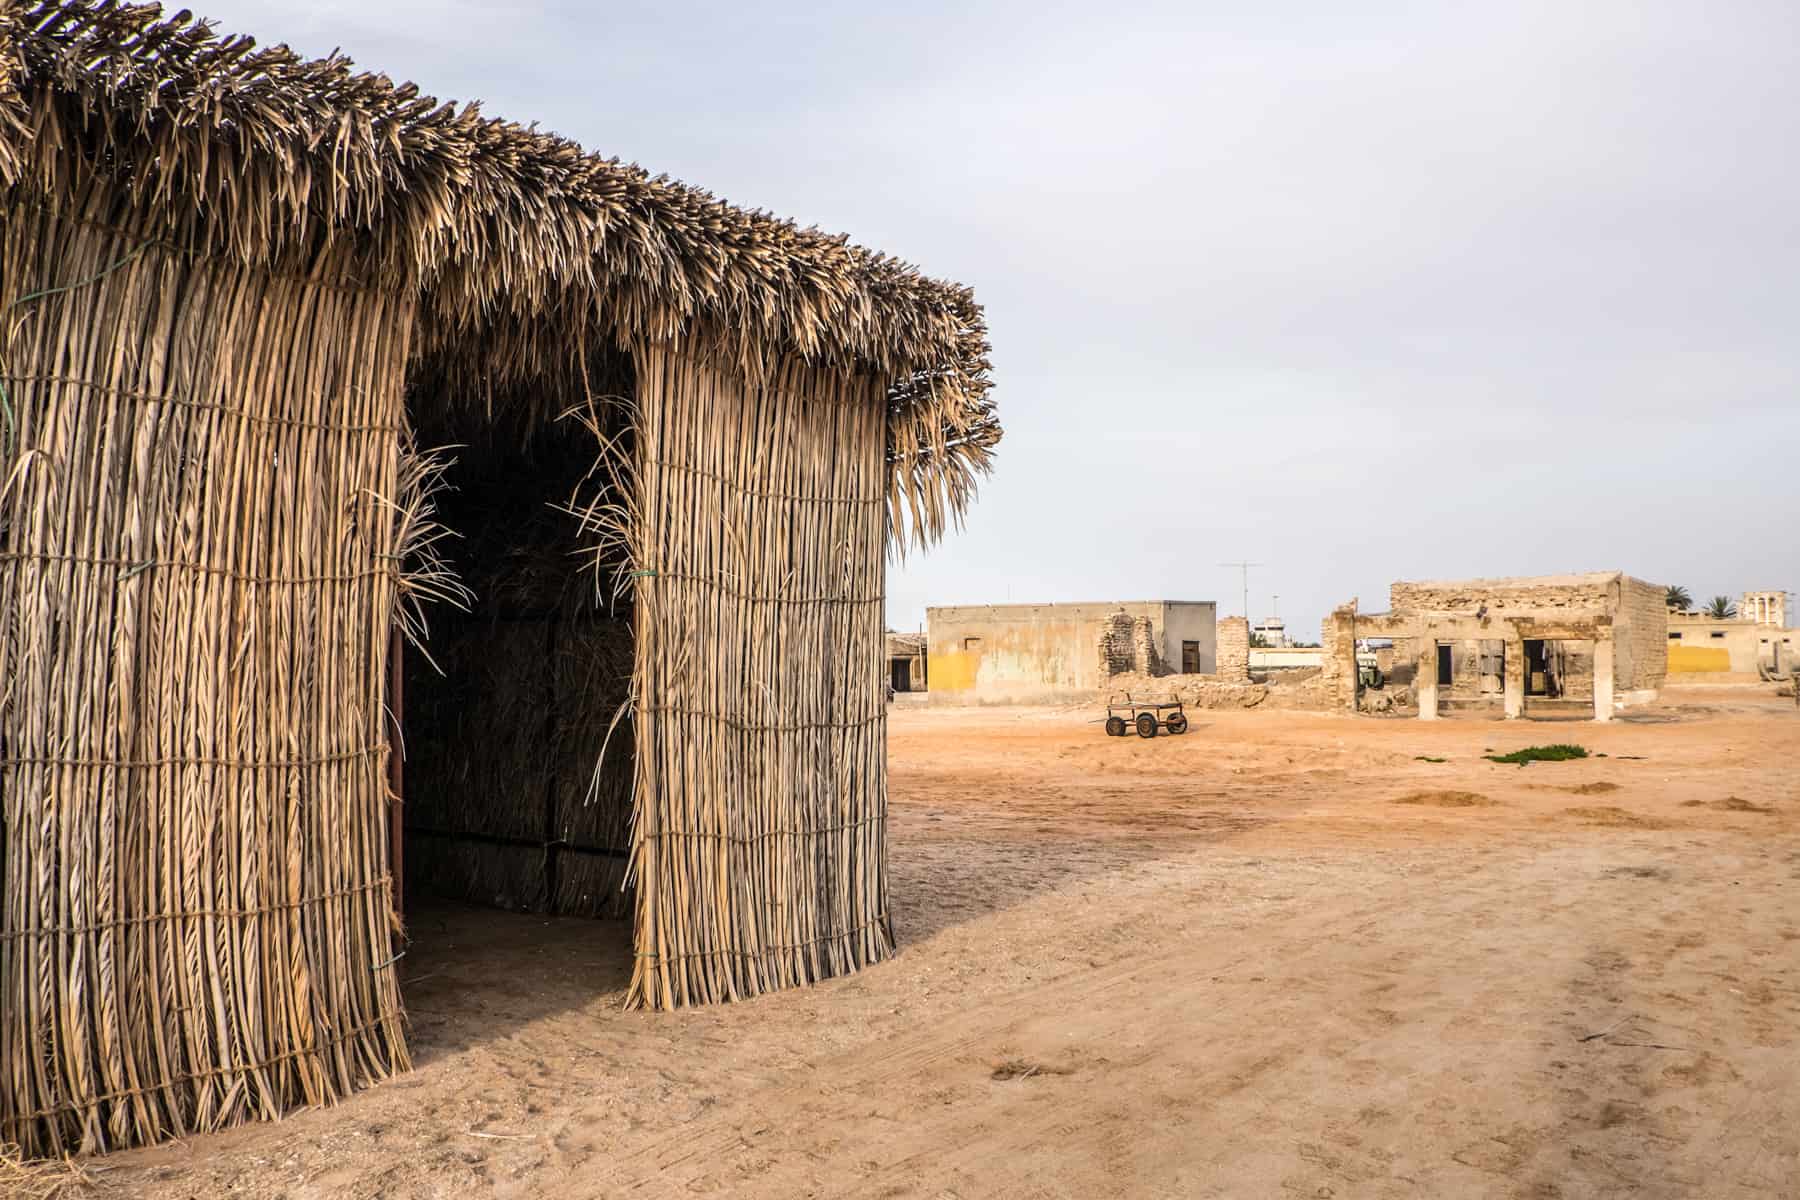 A box shaped building made of reeds and with no door, stands abandoned on orange sand. Other abandoned stone structures can be seen in the background. 